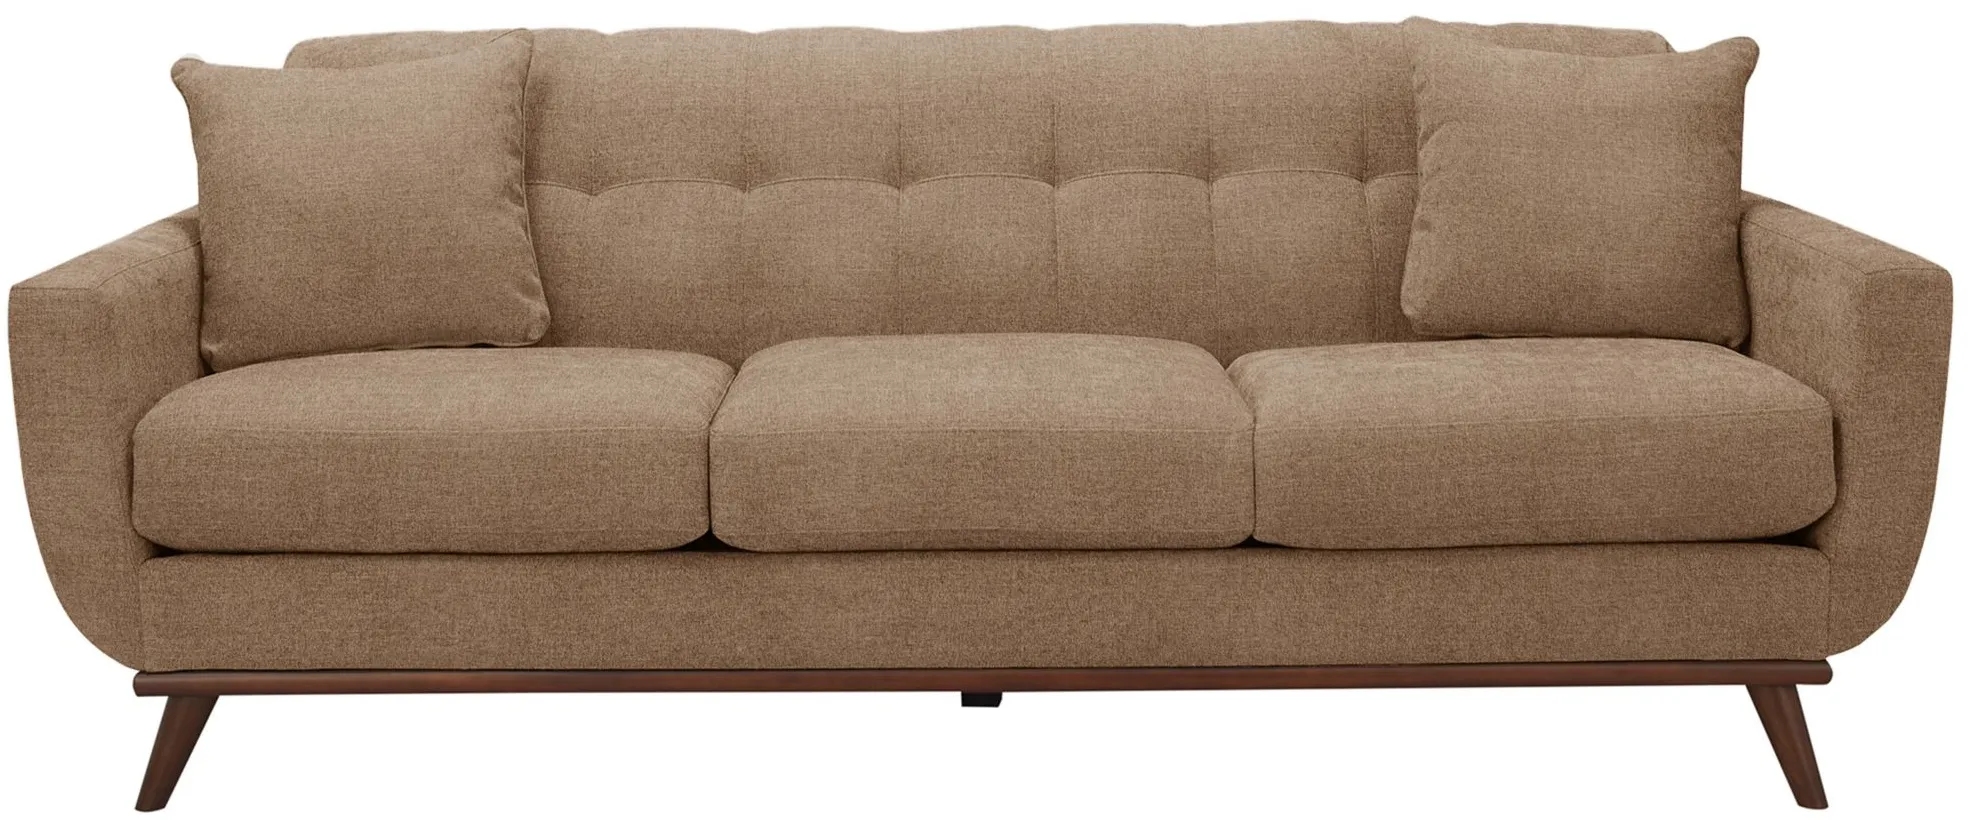 Milo Sofa in Suede-So-Soft Khaki by H.M. Richards